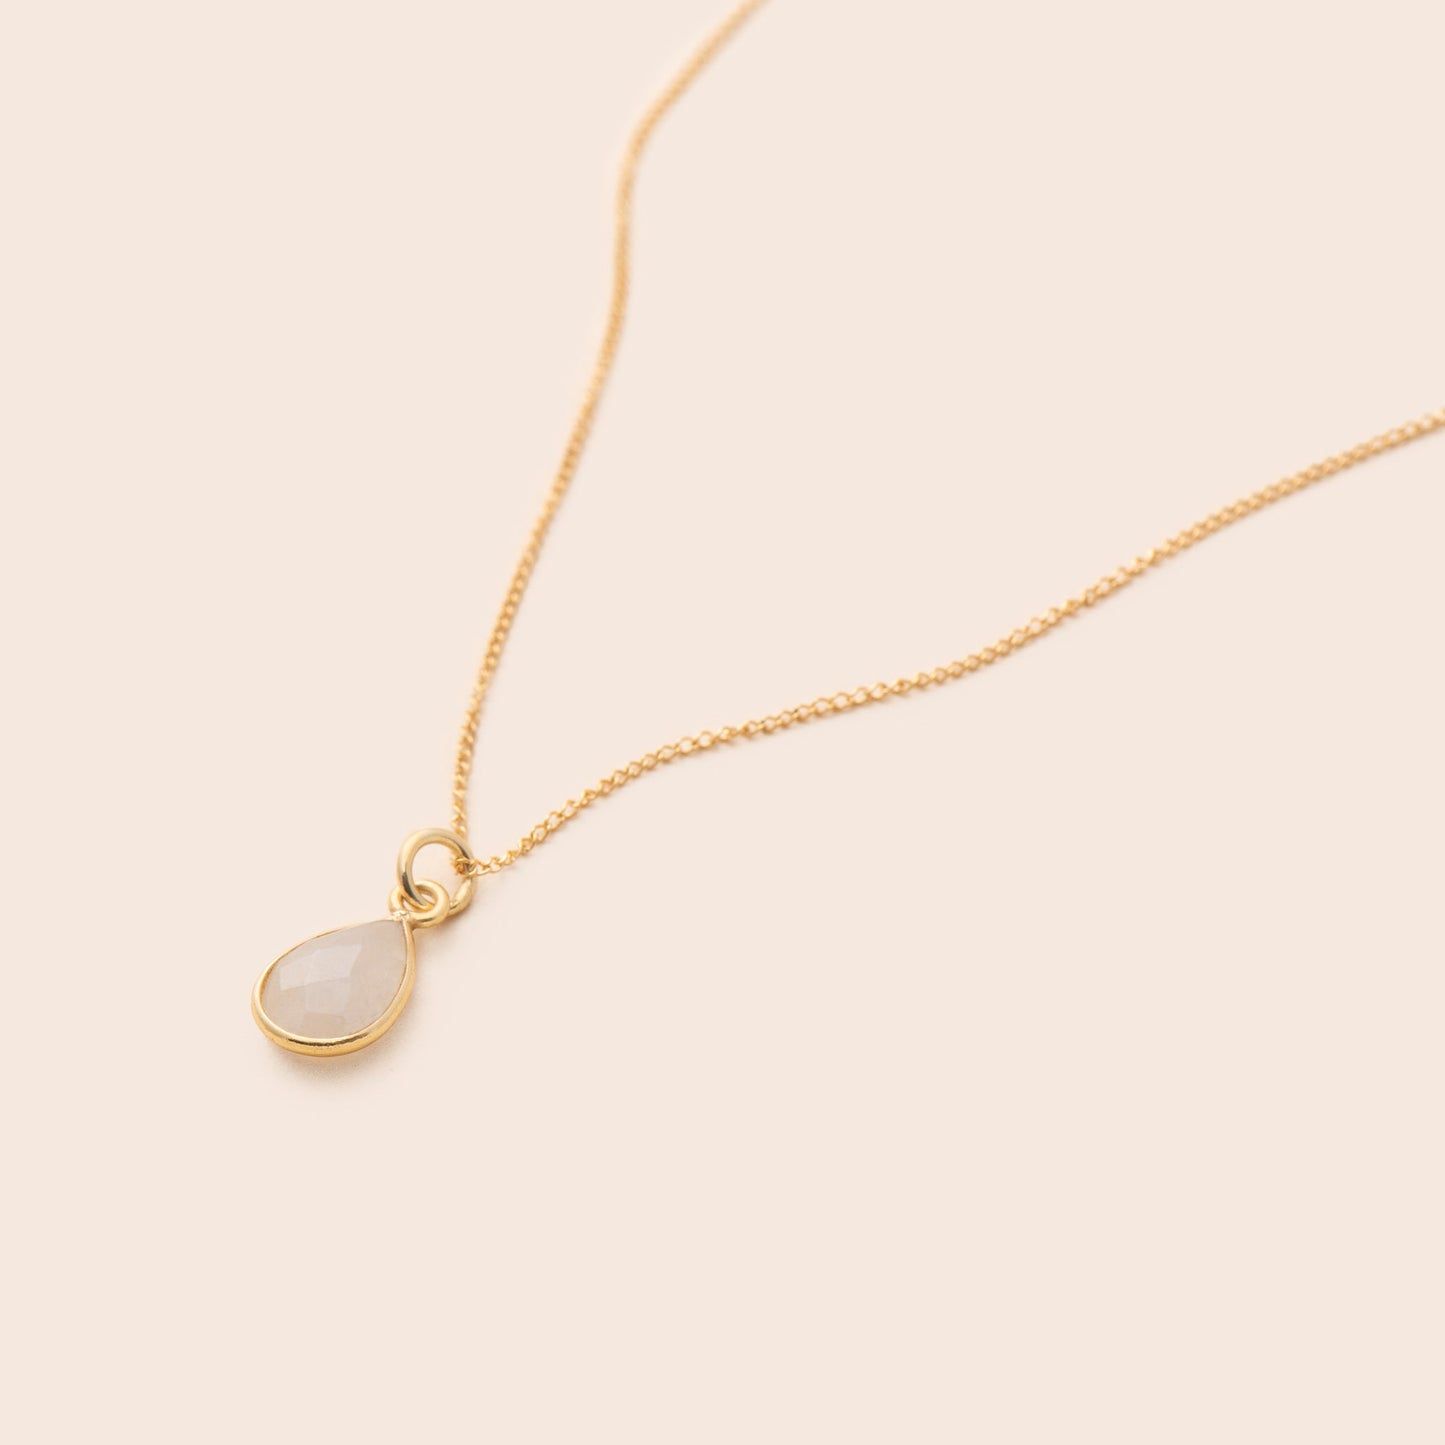 Load image into Gallery viewer, Moonstone Teardrop Necklace - Gemlet
